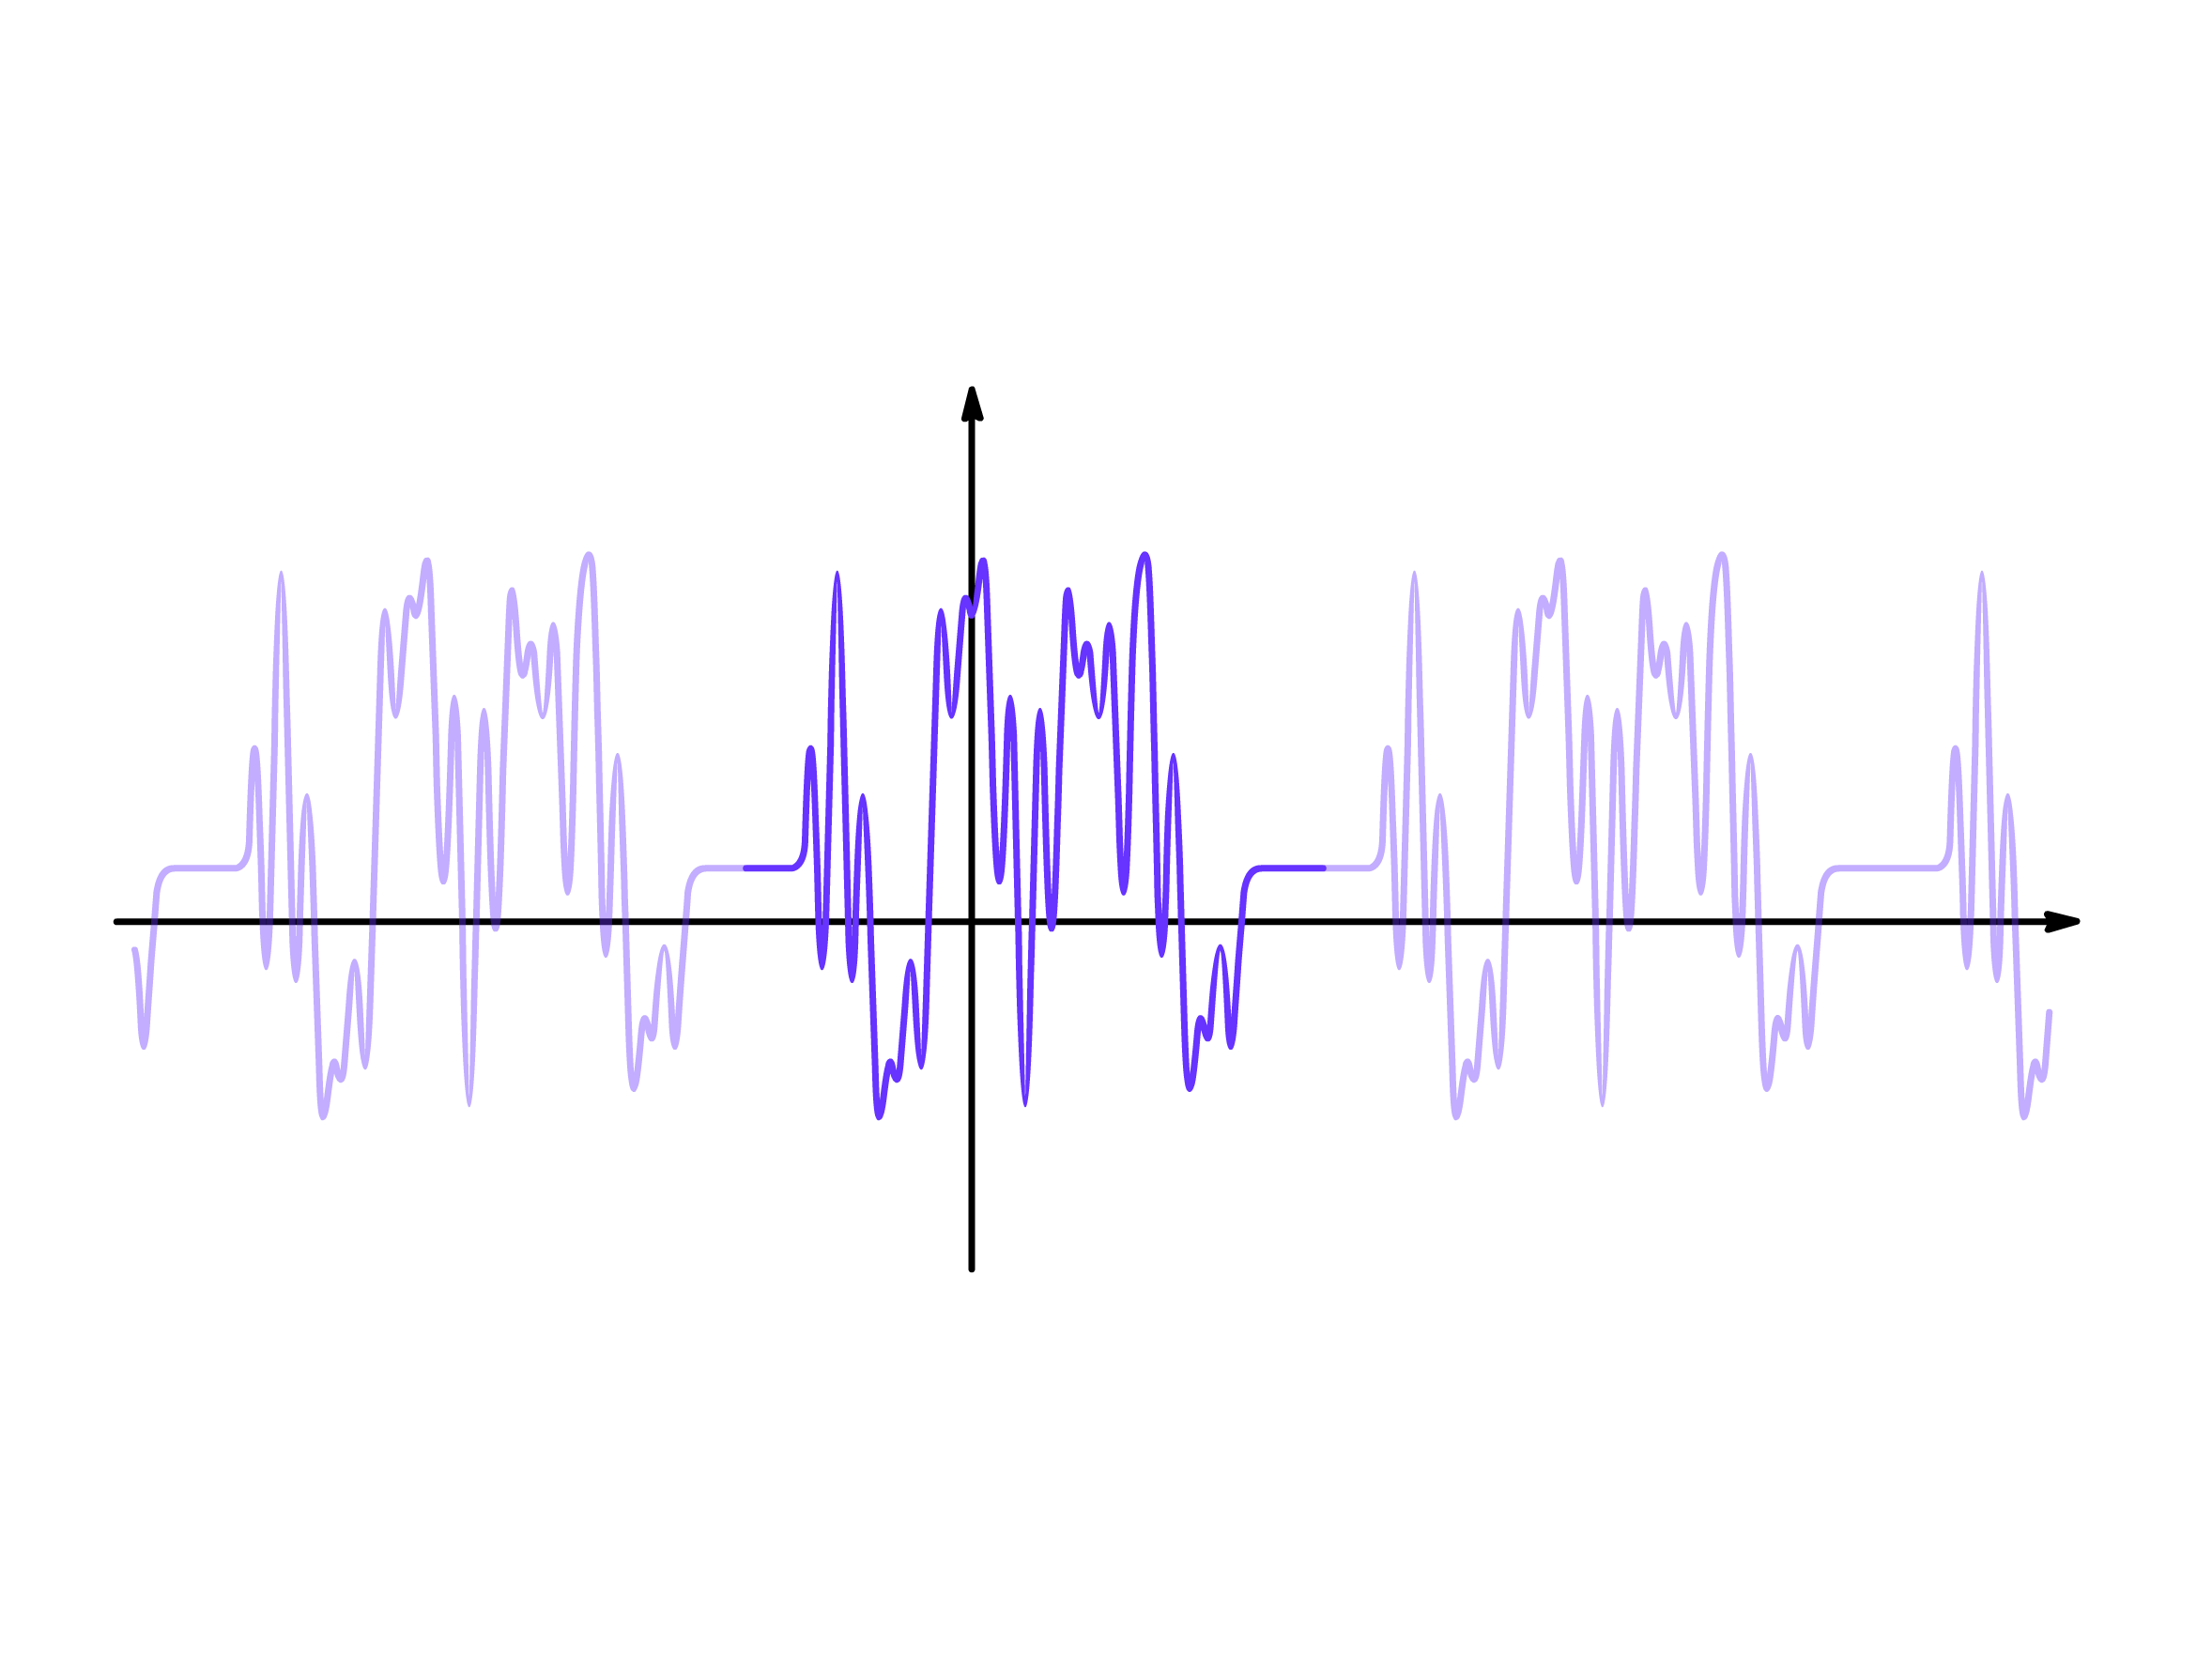 fourier_analysis_3.png